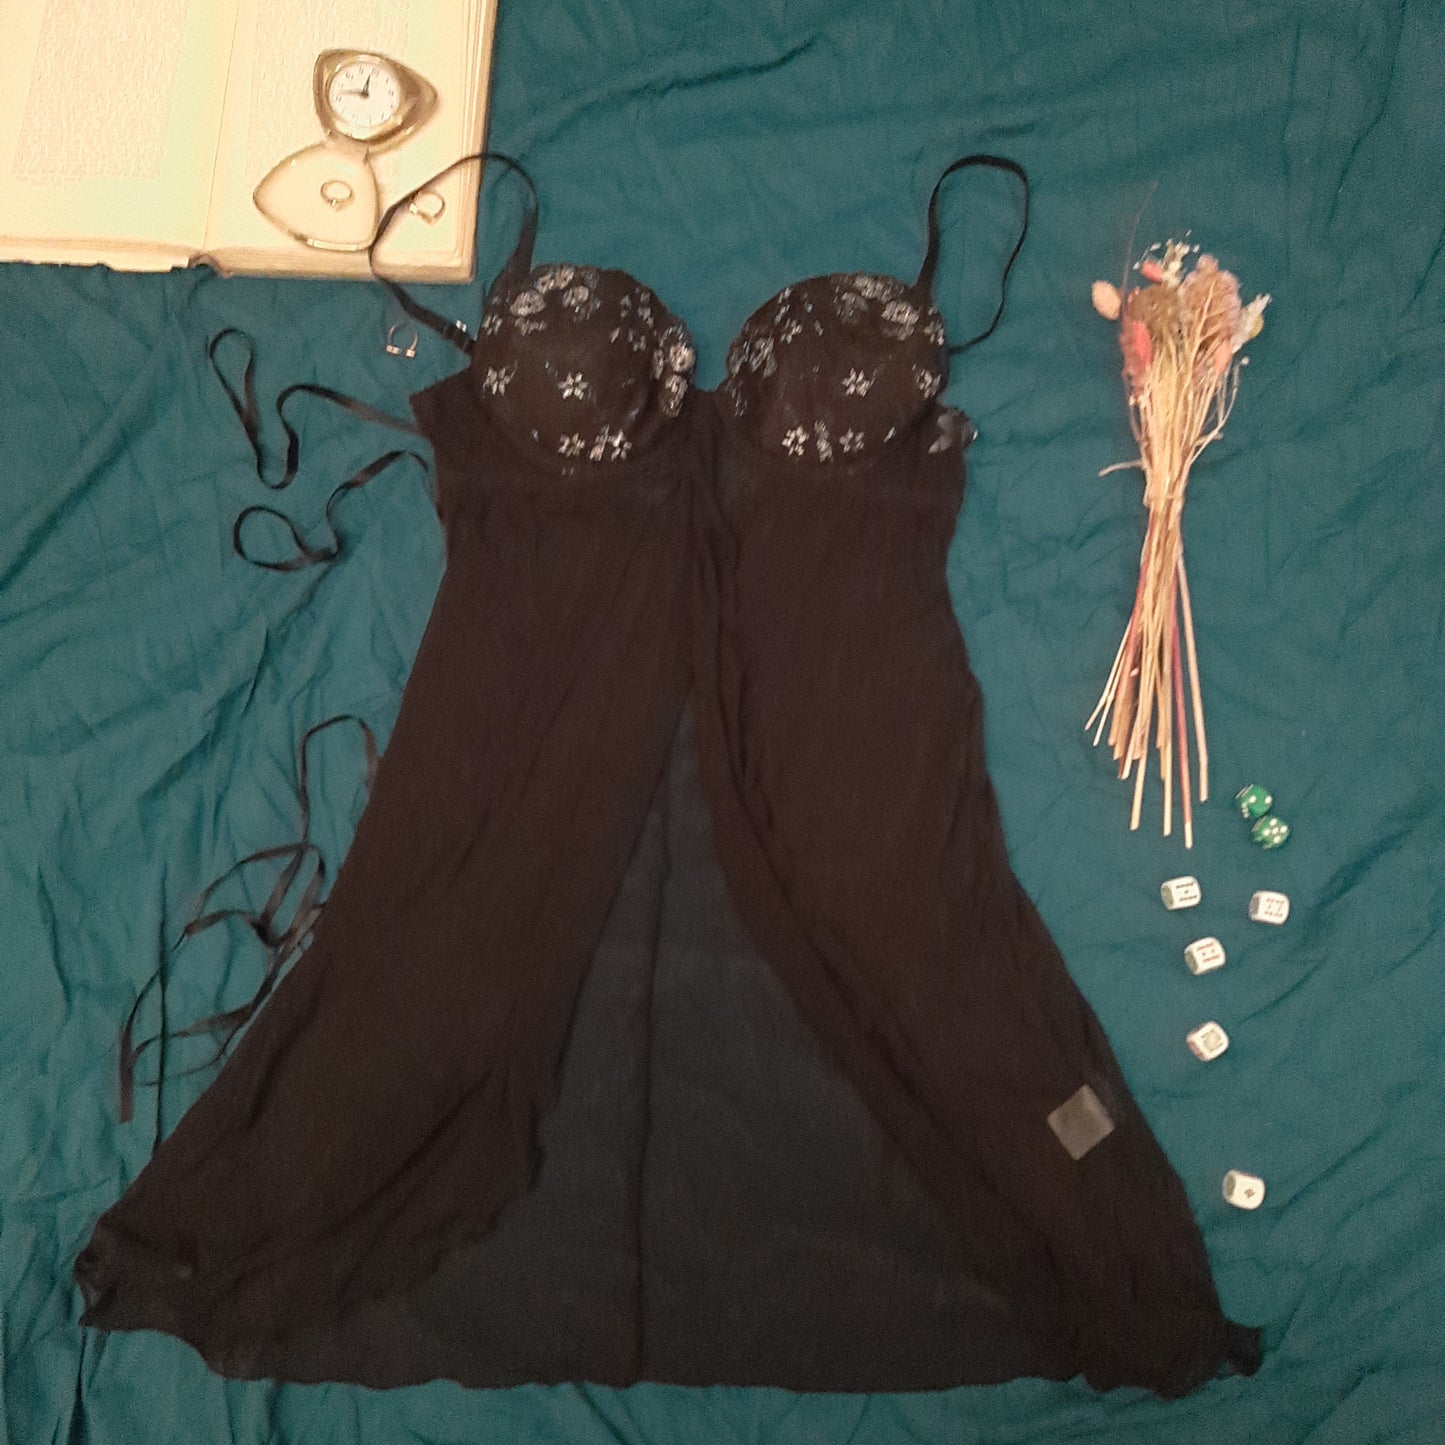 Black negligee with silver embroidery